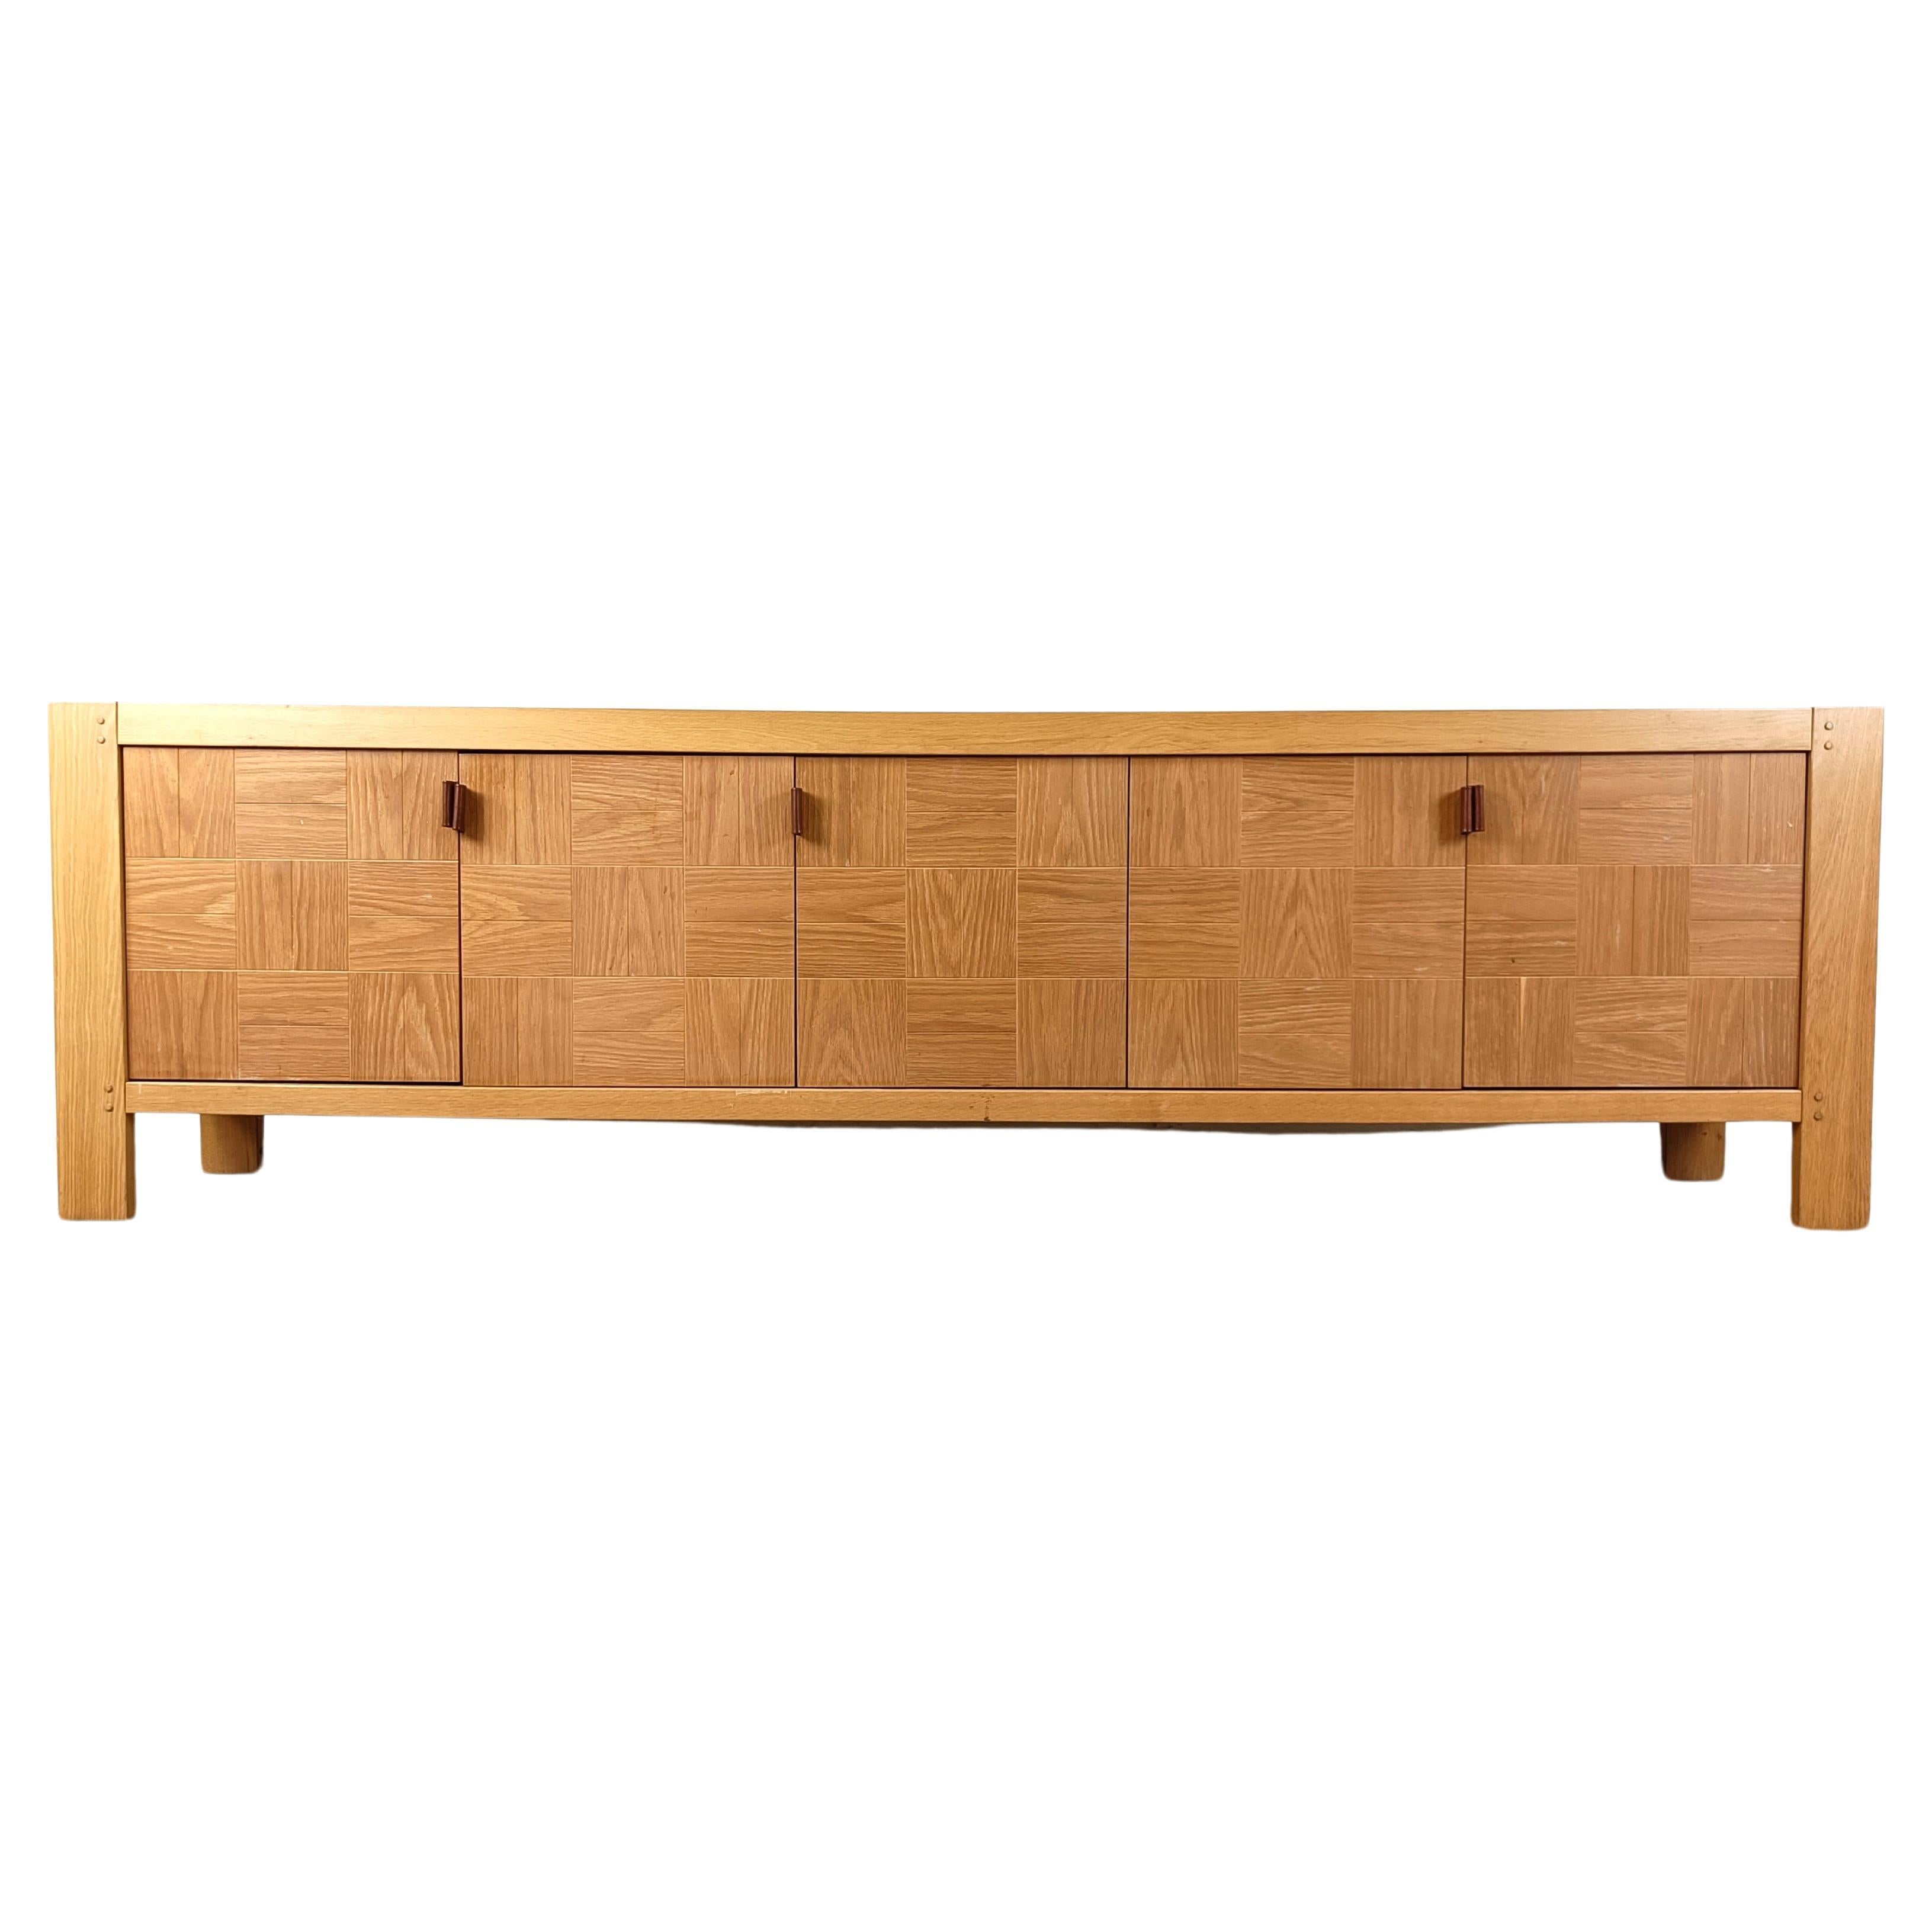 Vintage sideboard by Frans Defour for Defour, 1970s For Sale